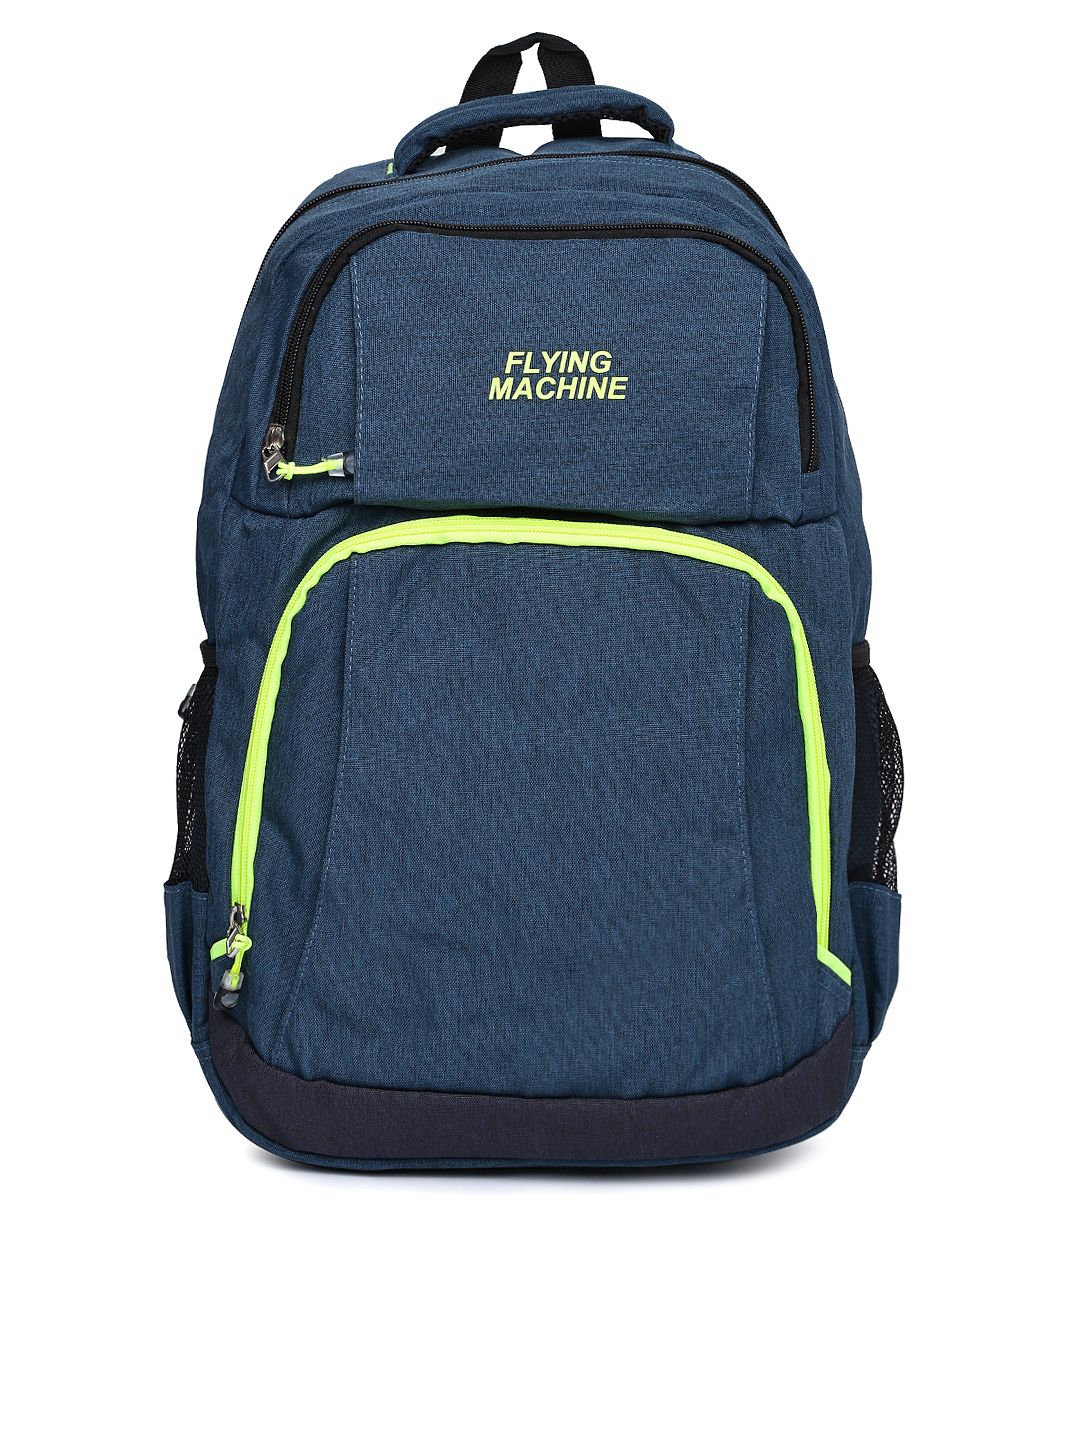 Flying Machine Unisex Navy Laptop Backpack Price in India